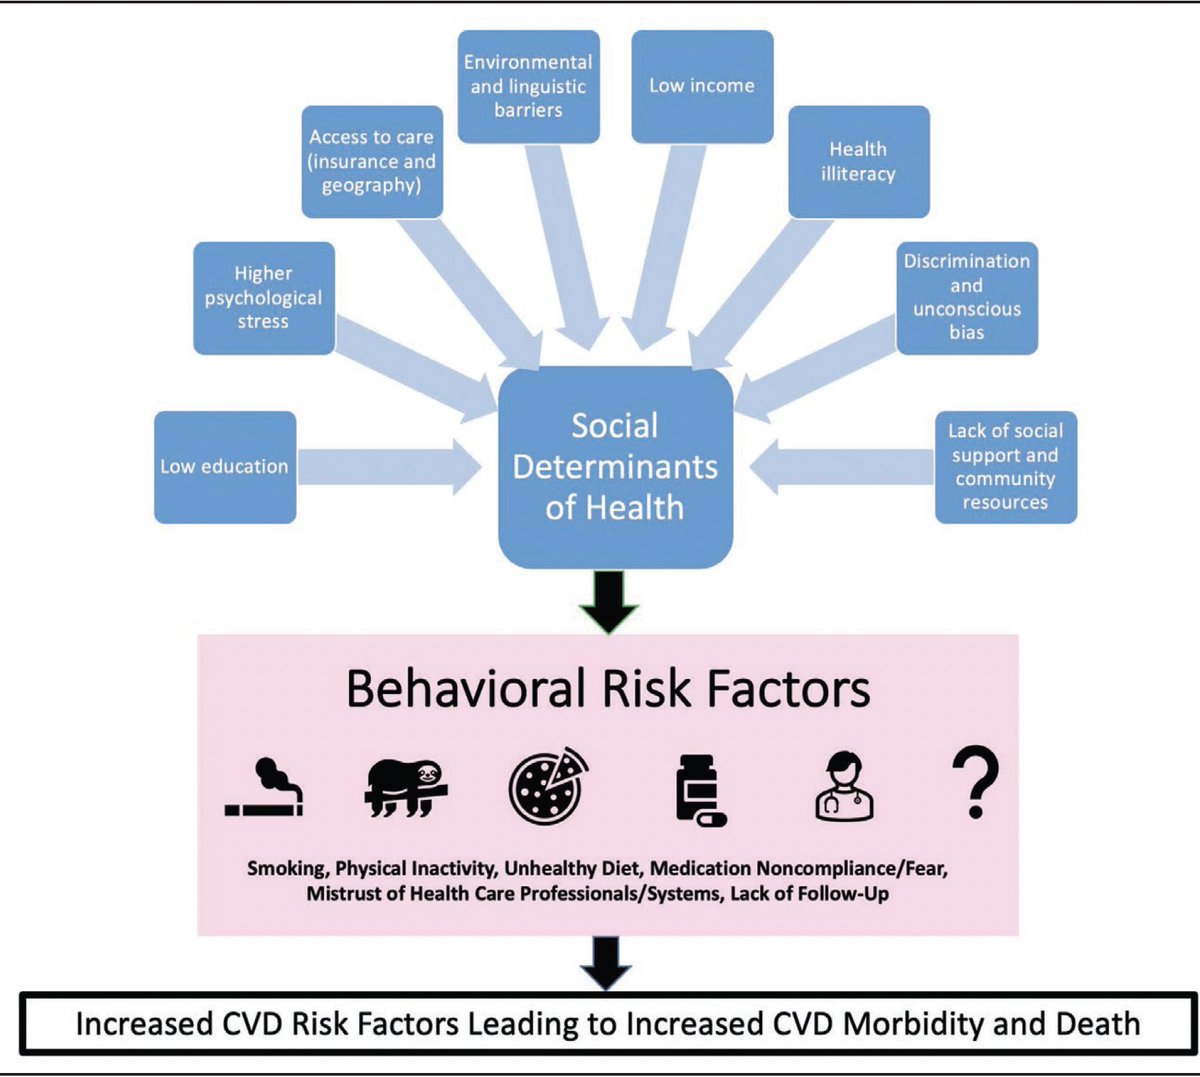 Cardiovascular risk factors in women and the impact of race and ethnicity contribution. Nonbiological variables need to be incorporated into the cardiovascular risk assessment of women.
@American_Heart @GoRedForWomen #MinorityHealthMonth
bit.ly/3ZU4cTY